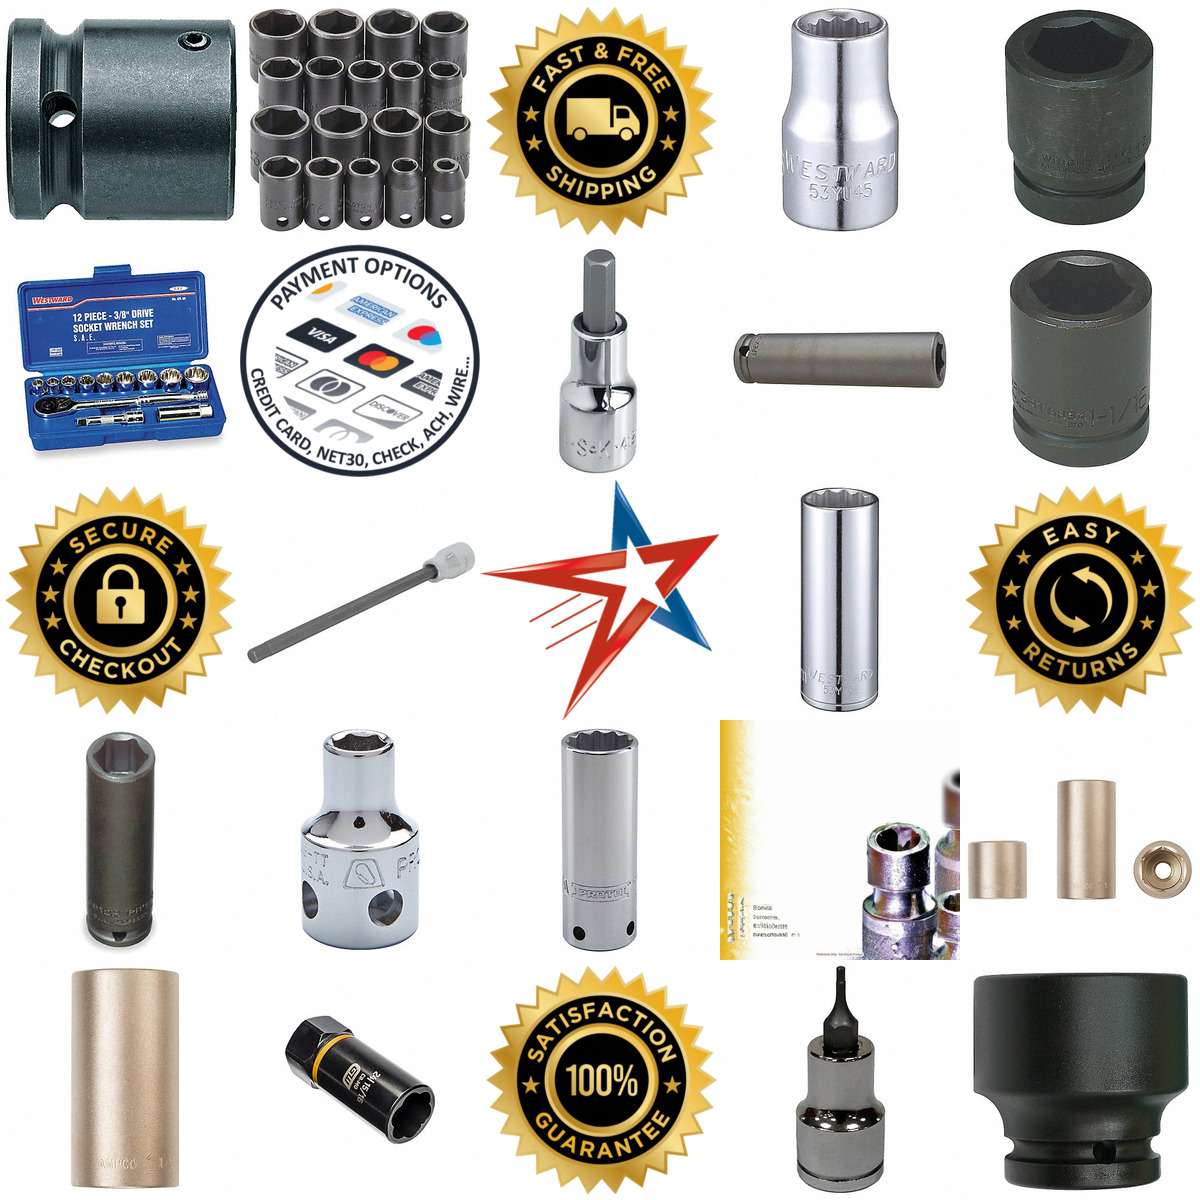 A selection of Sockets Bits and Socket Drive Tools products on GoVets